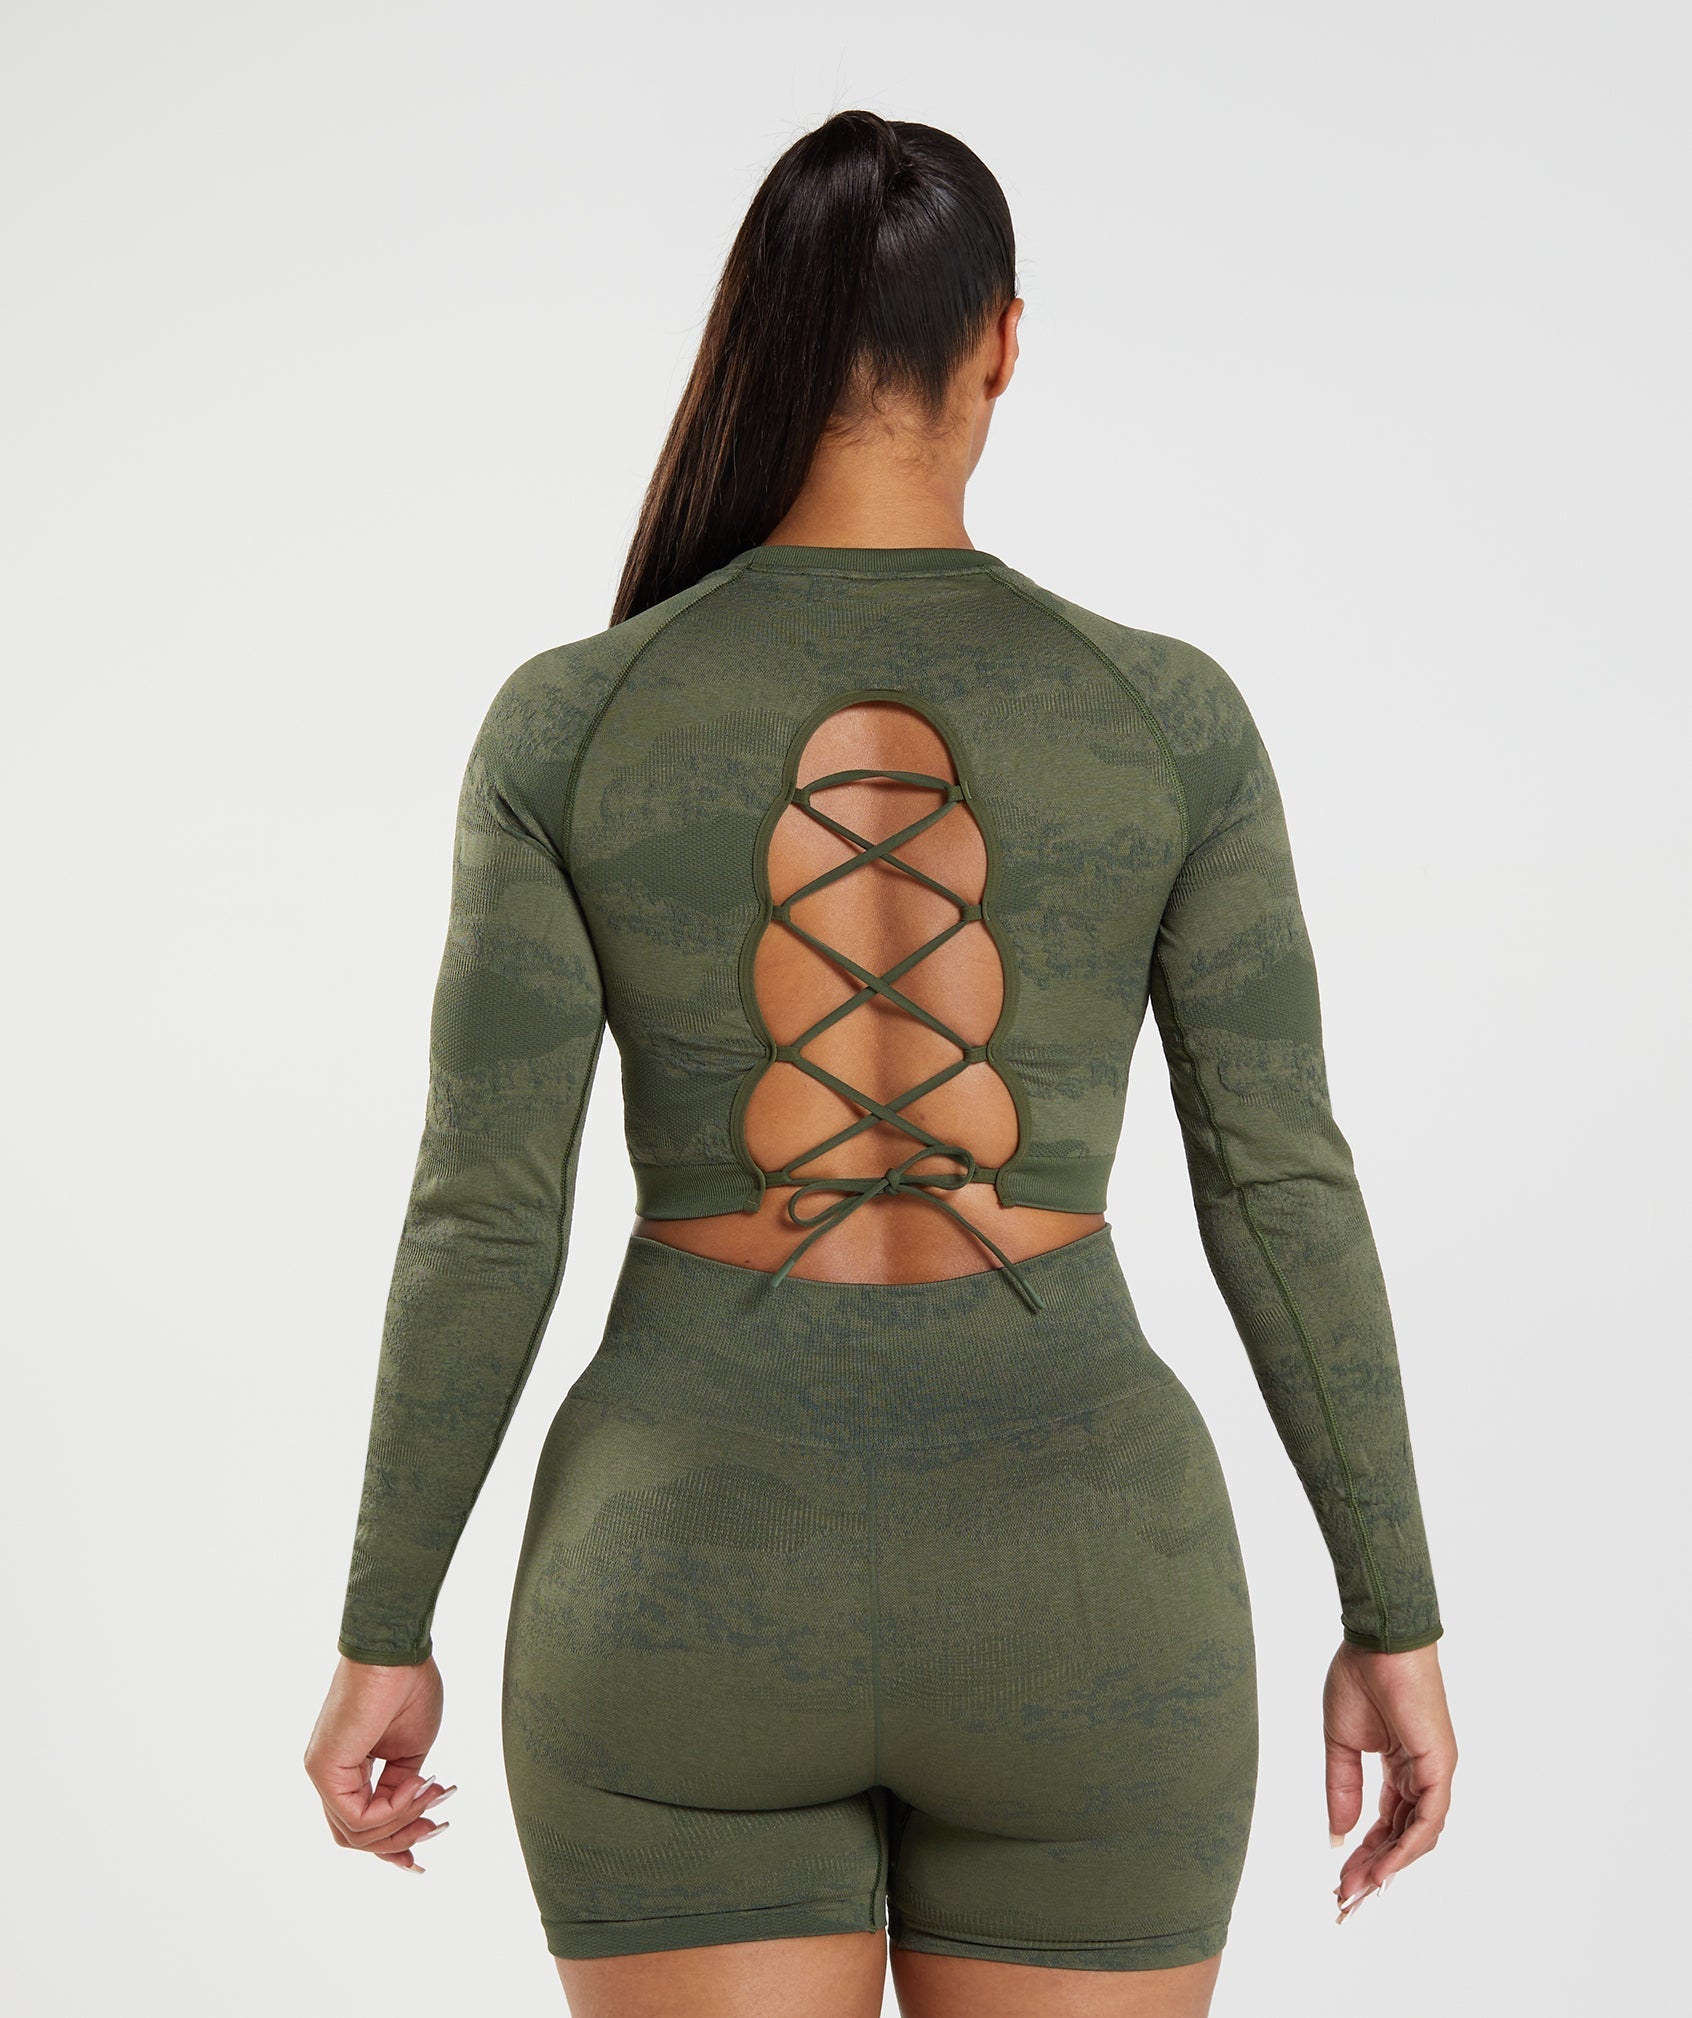 Adapt Camo Seamless Lace Up Back Top in {{variantColor} is out of stock